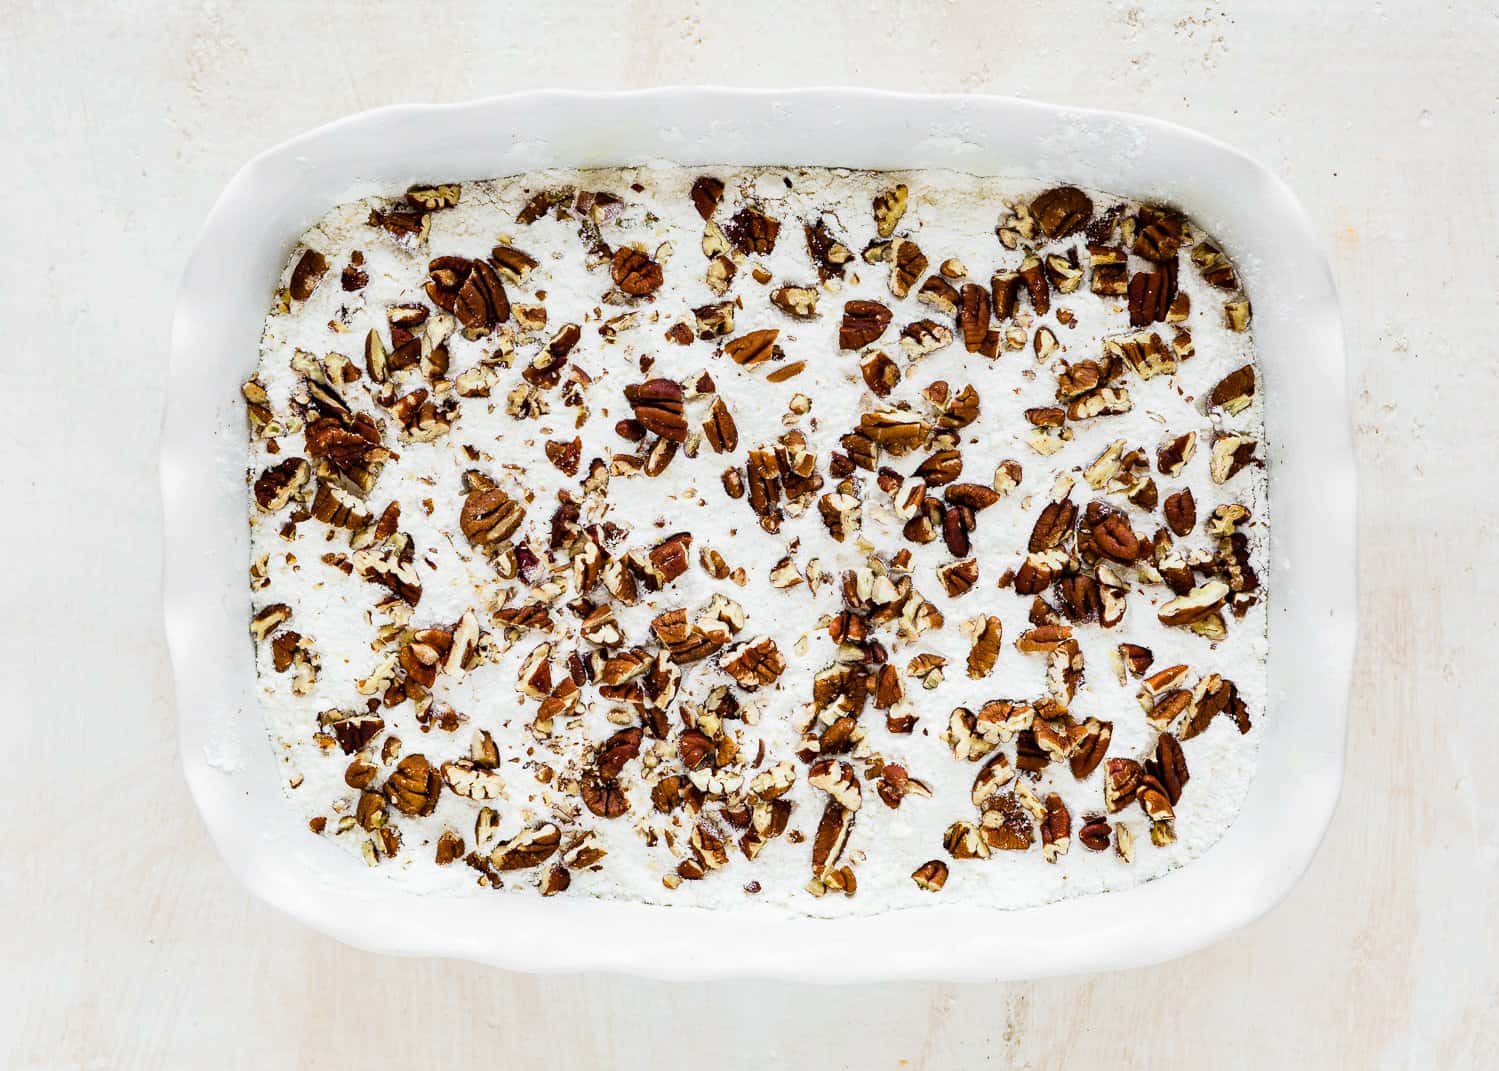 eggless dump cake mixture in a baking dish with a cake mix and pecans sprinkled on top.